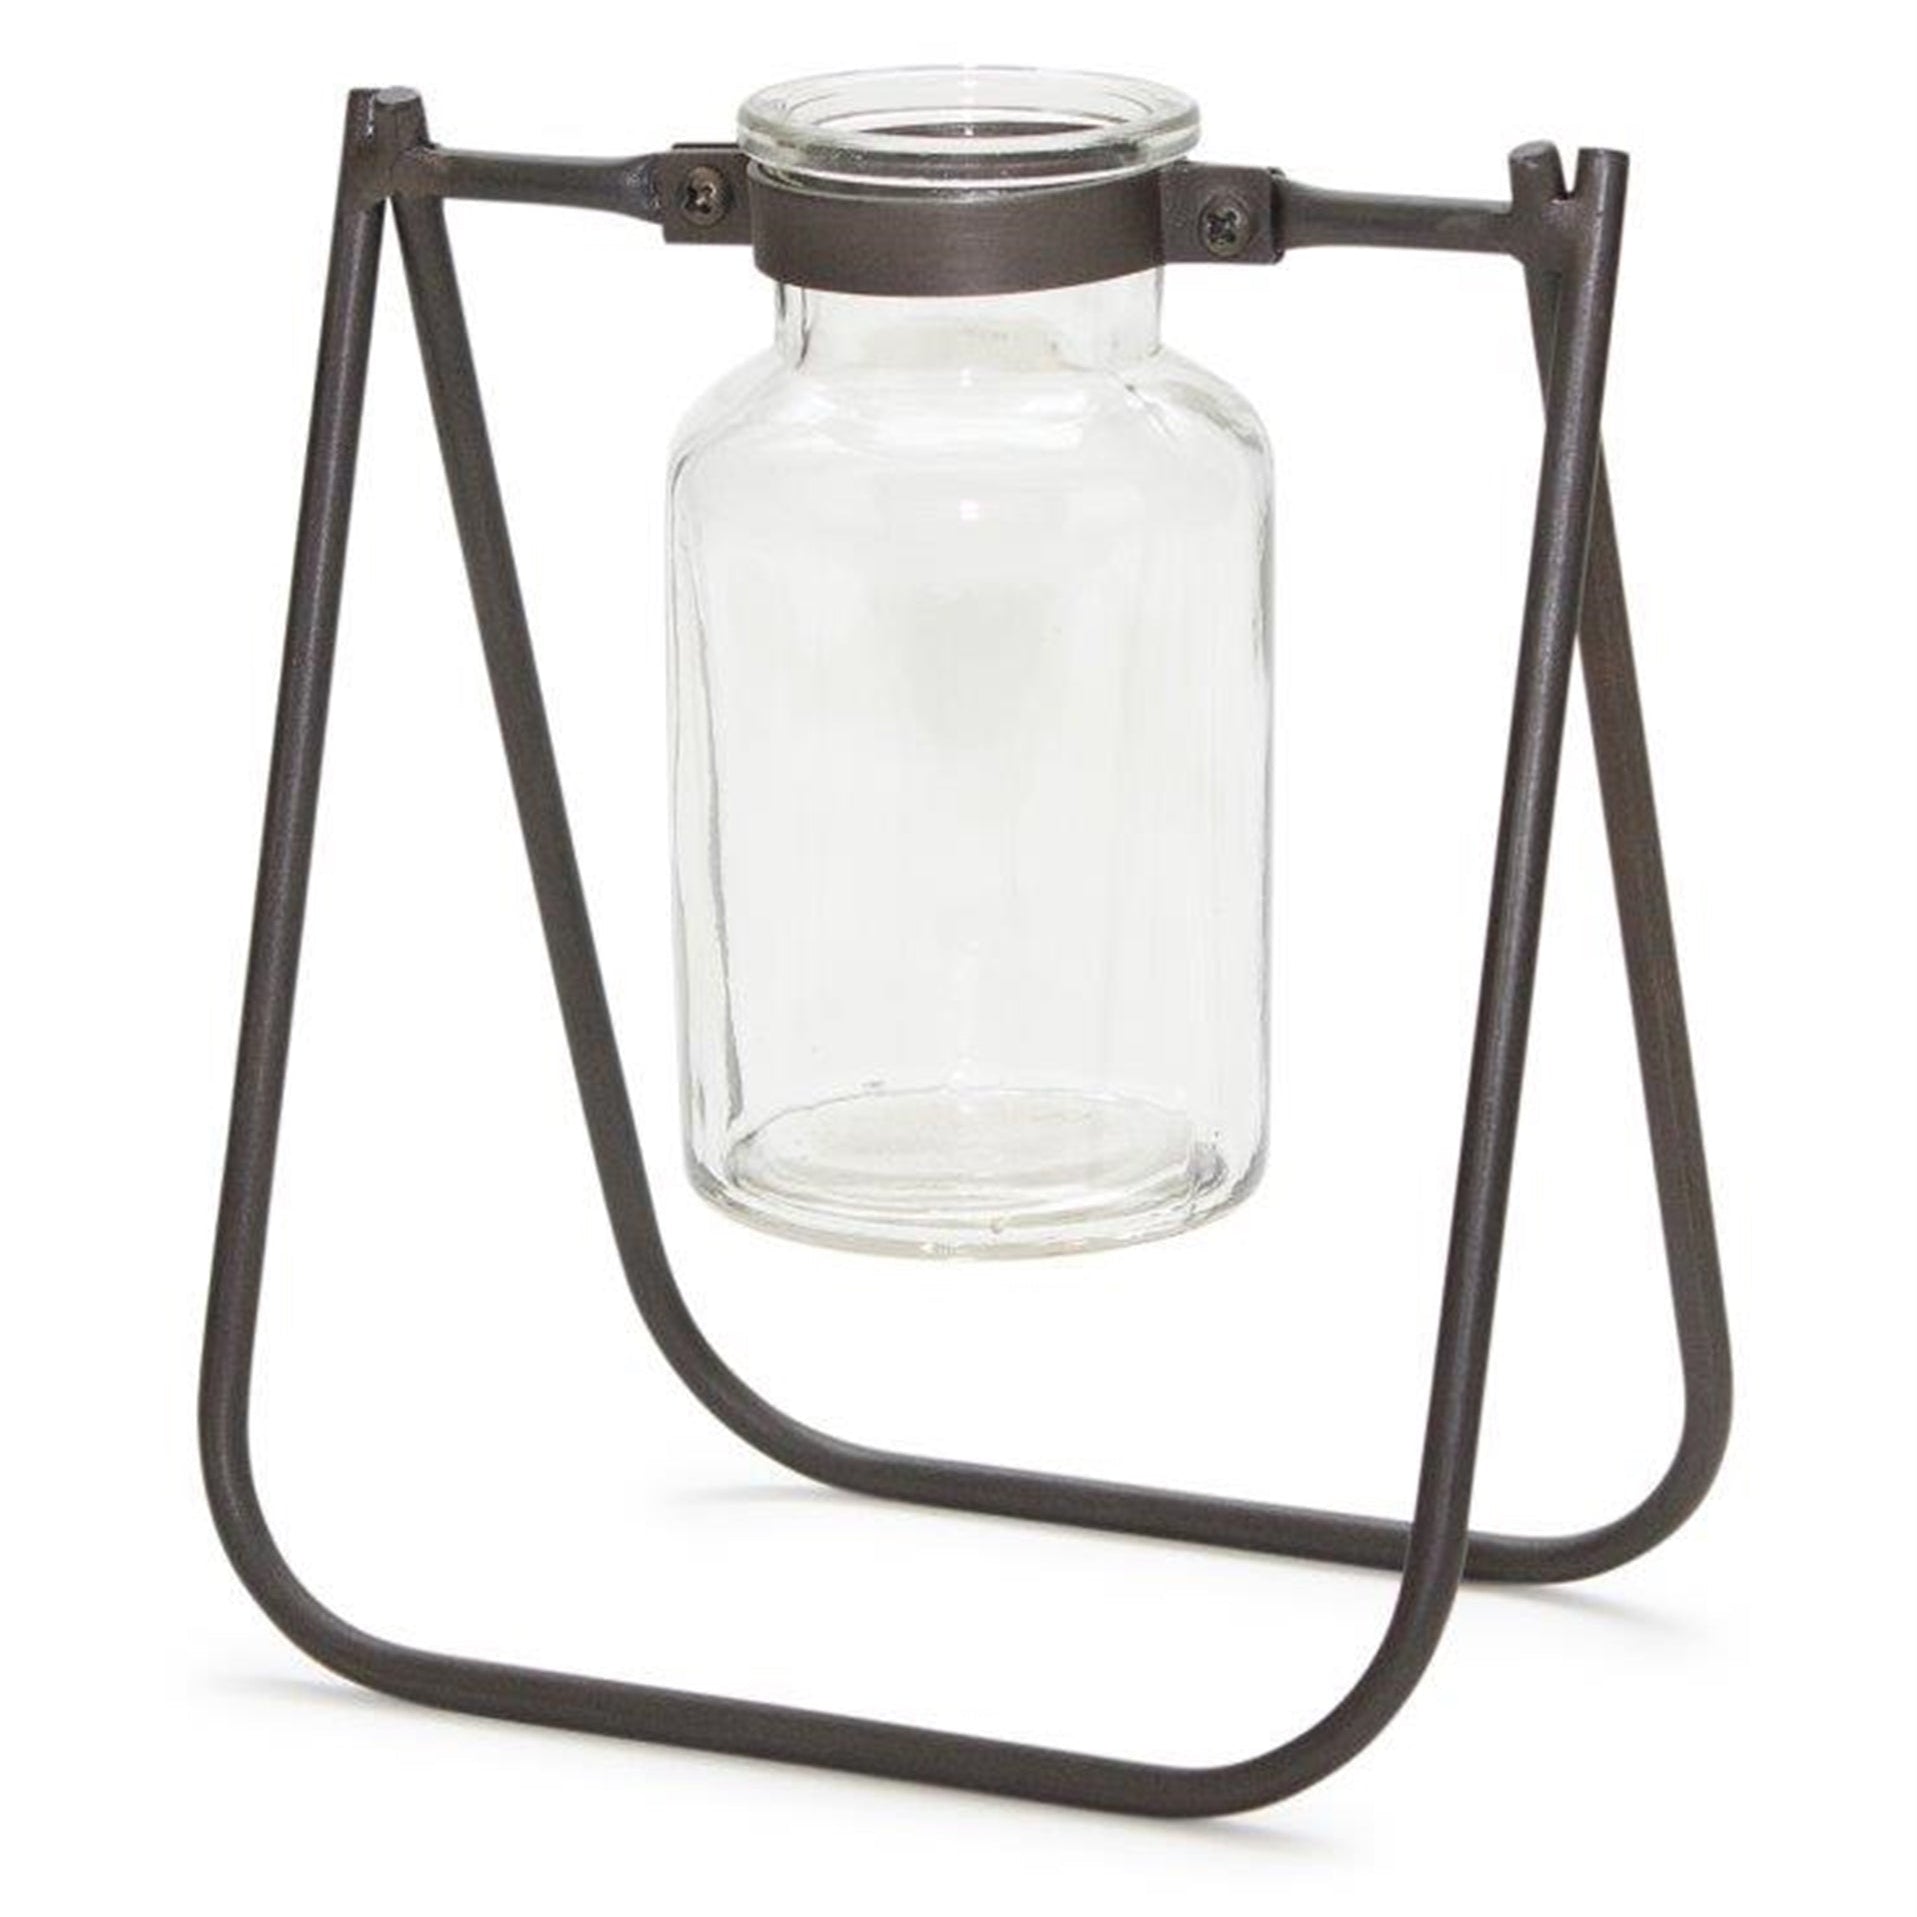 Hanging Glass Jar Vase with Metal Stand, Set of 2 - Pier 1